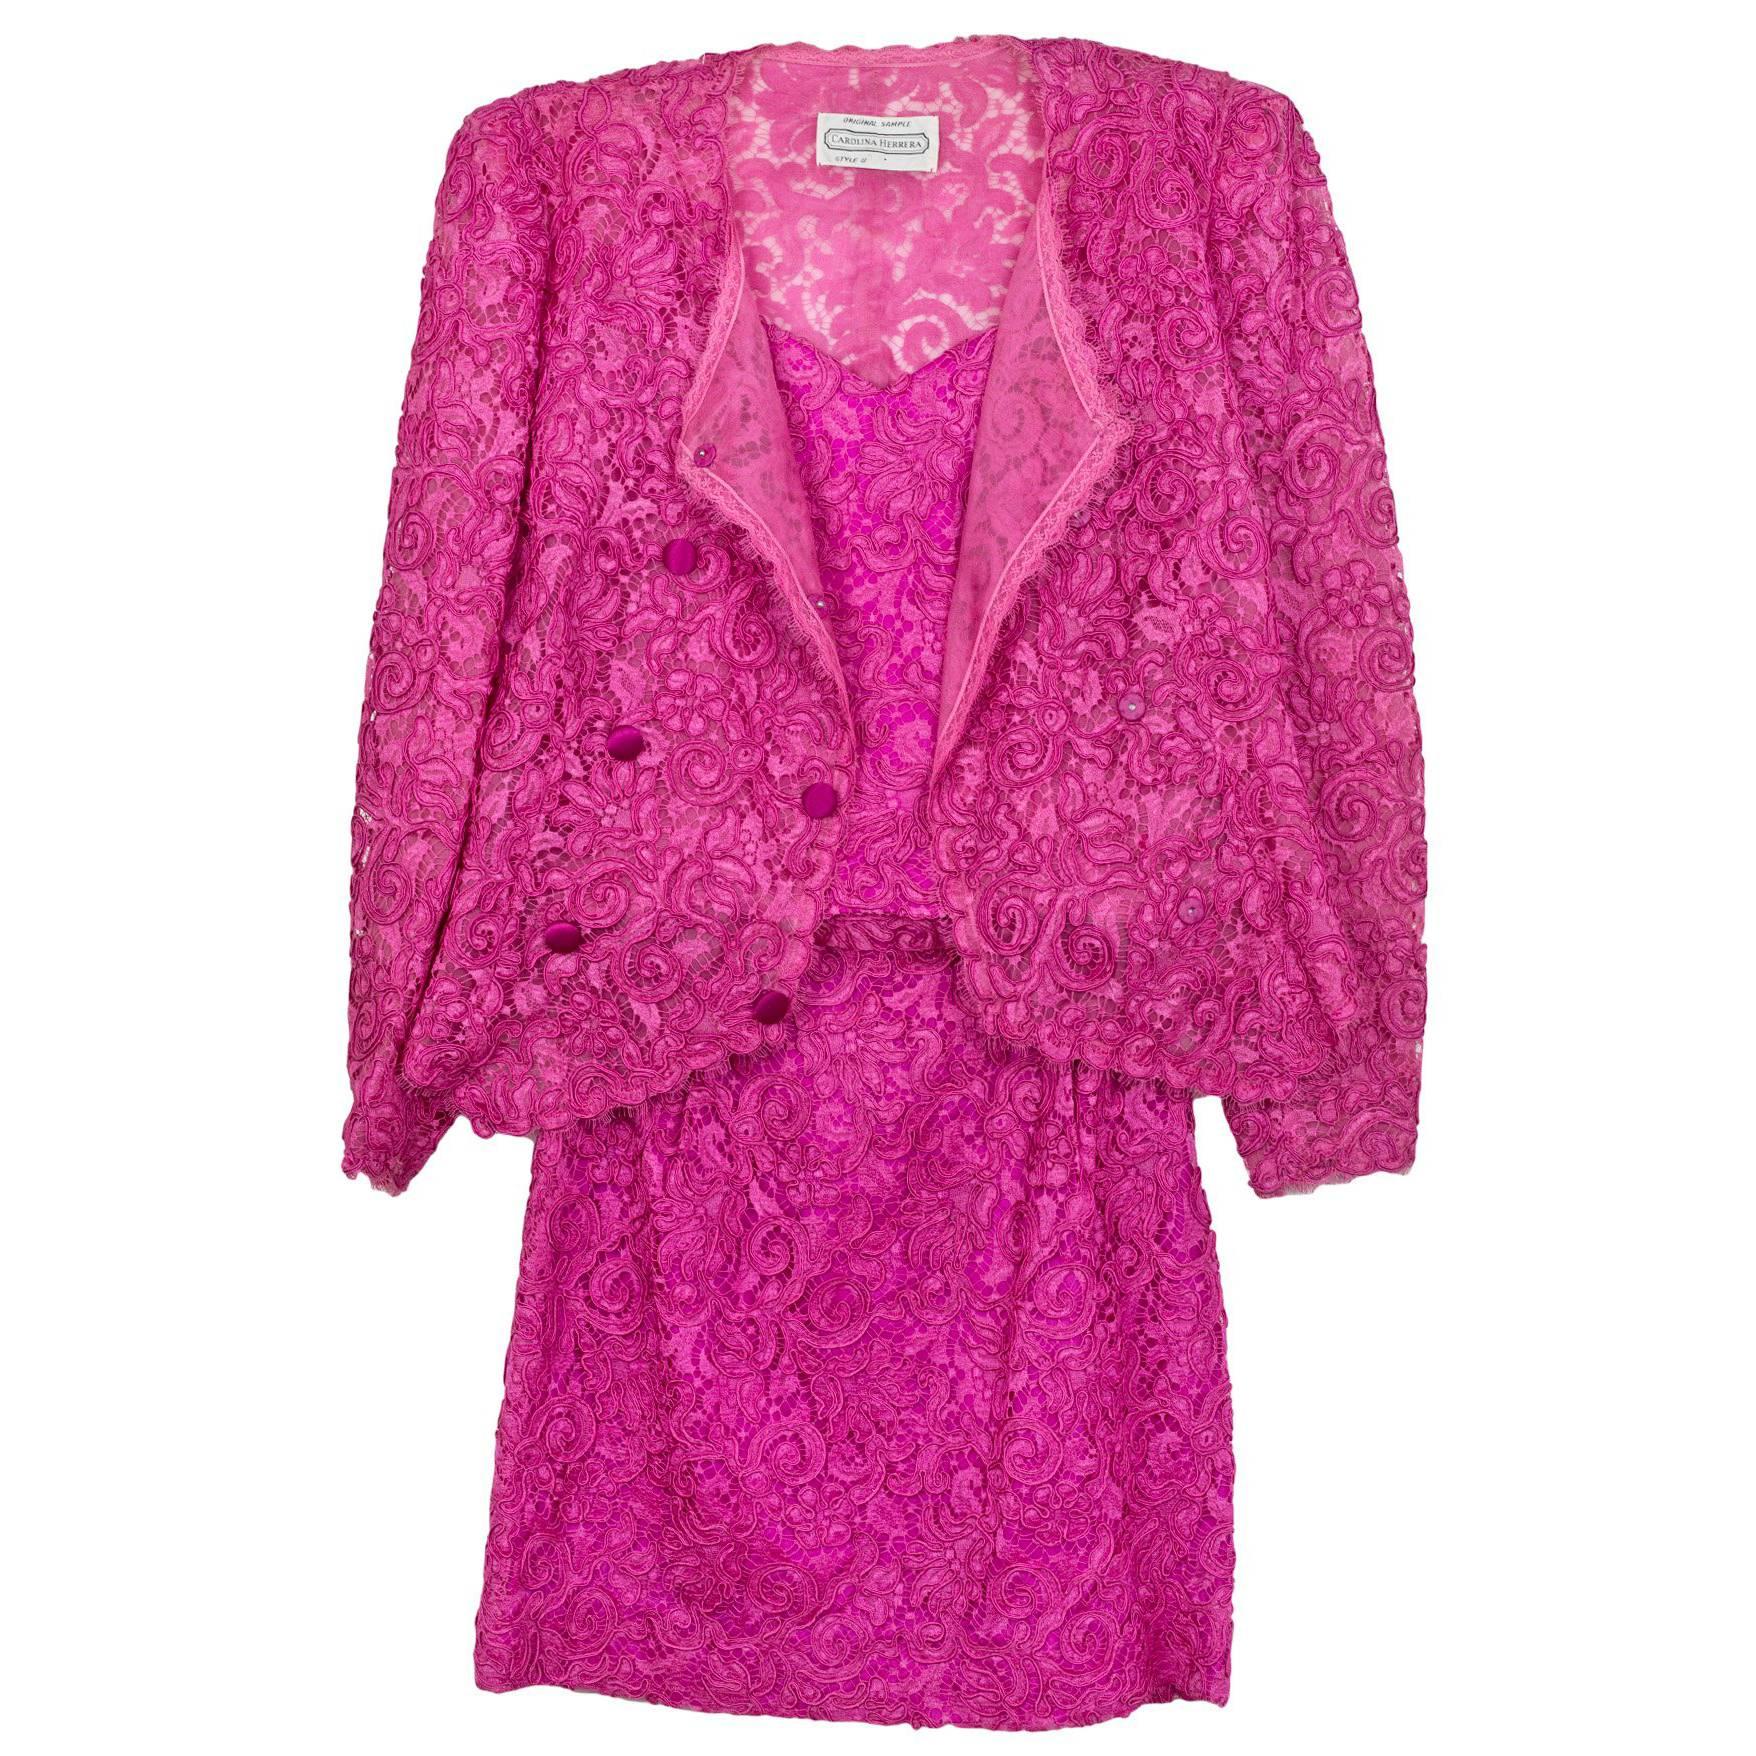 Carolina Herrera Pink Lace Double Breasted Jacket 

Made In: USA
Color: Pink
Composition: 50% cotton, 30% rayon, 20% nylon
Lining: Pink, 100% silk
Closure/Opening: Jacket- Double breasted snap closure
Exterior Pockets: None
Interior Pockets: